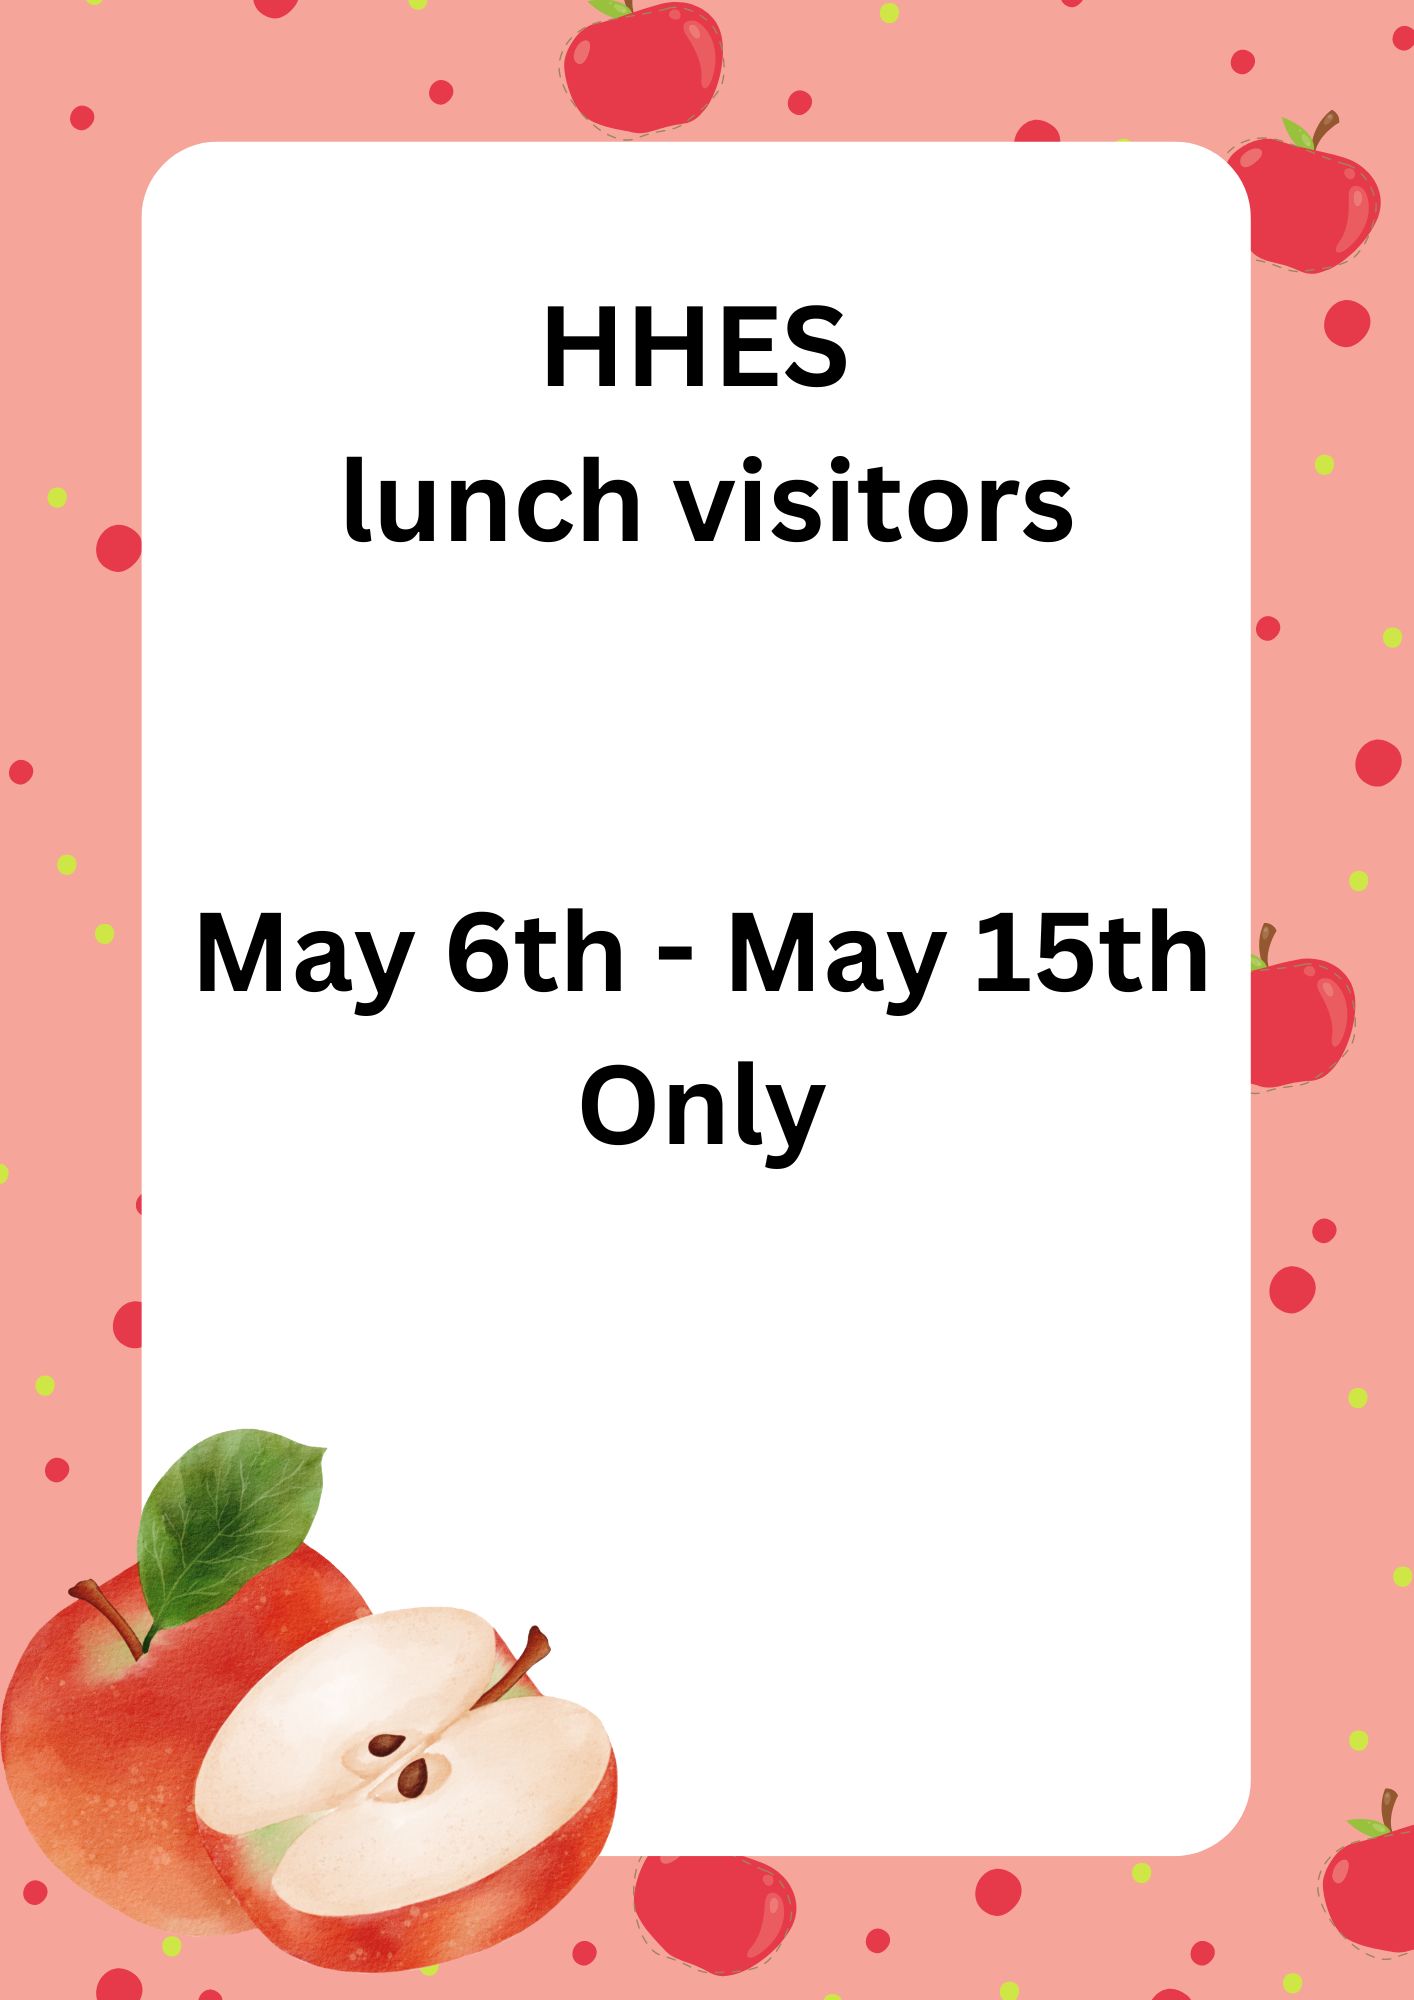 HHES Lunch Visitors May 6th - May 15th Only